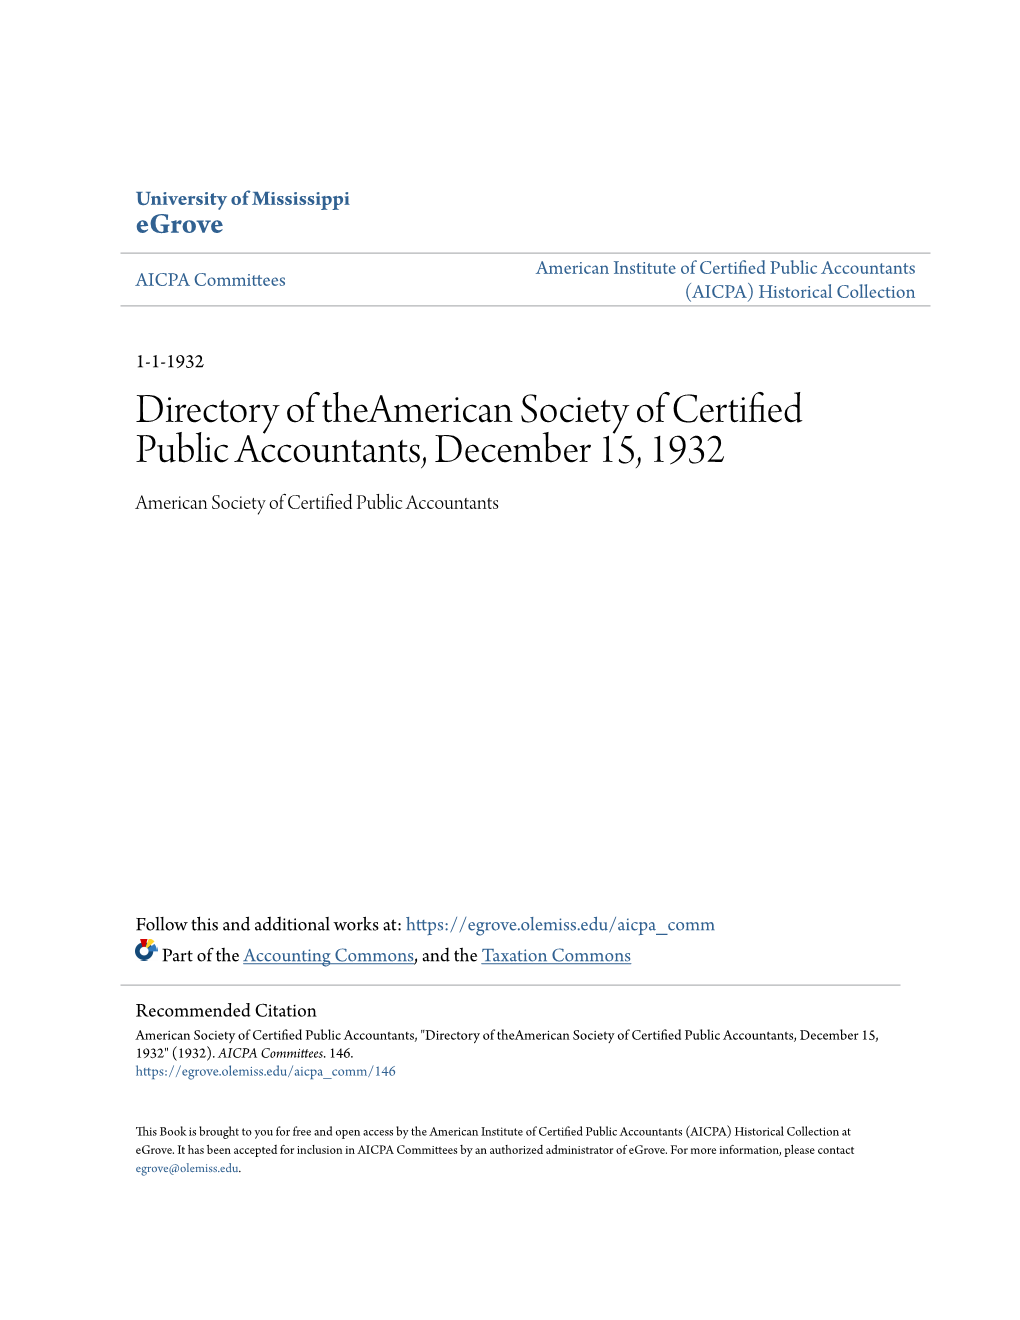 Directory of Theamerican Society of Certified Public Accountants, December 15, 1932 American Society of Certified Public Accountants